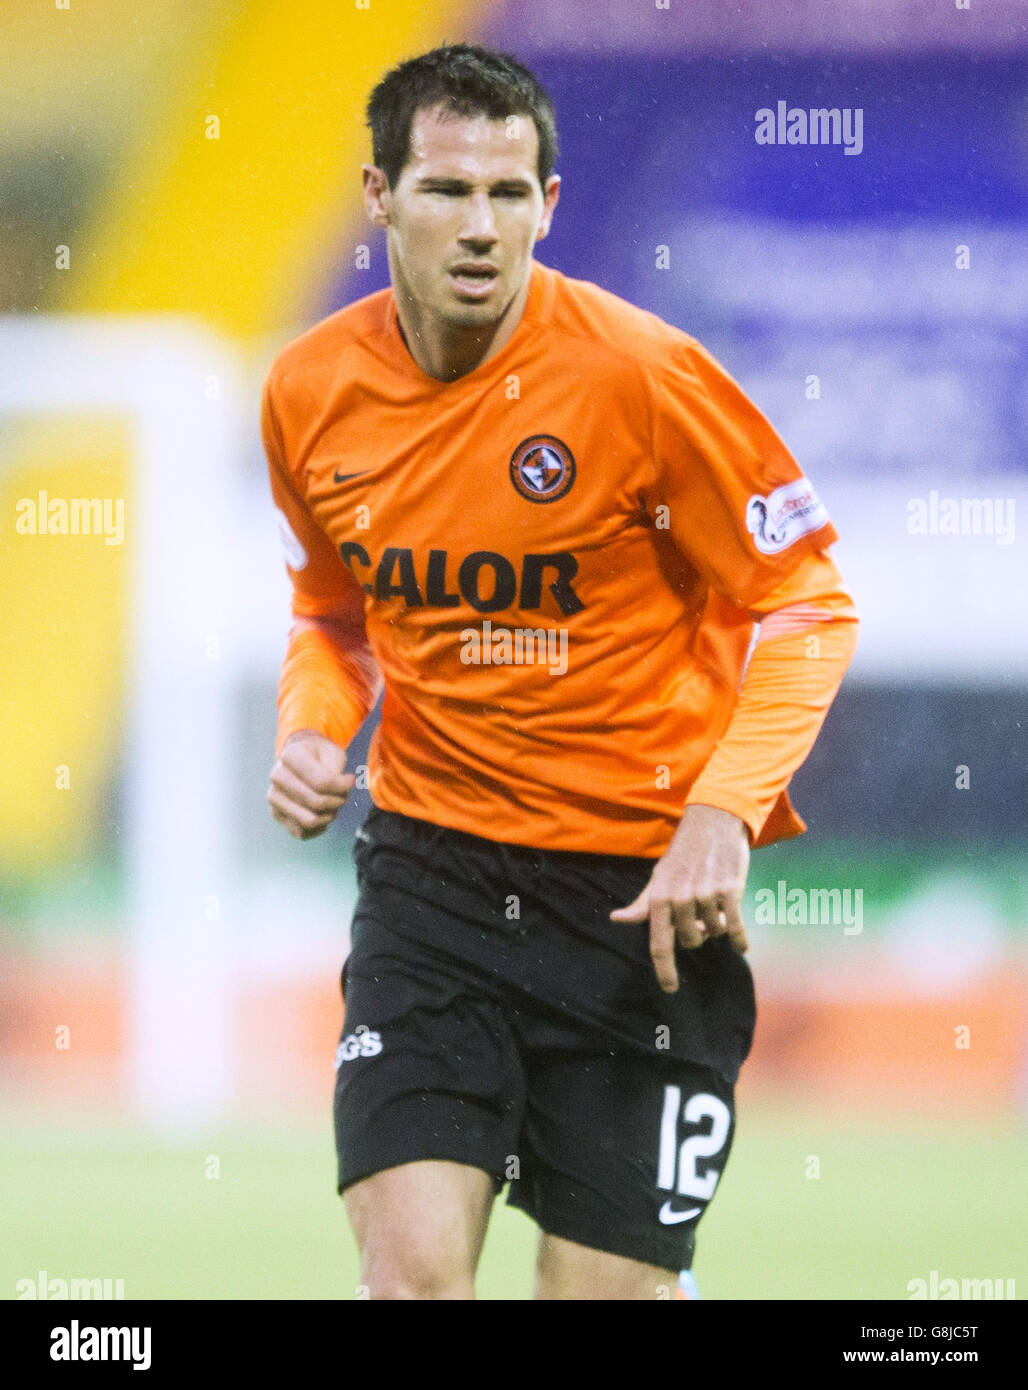 Dundee United's Ryan Mcgowan during the Ladbrokes Scottish Premiership match at Rugby Park, Kilmarnock. PRESS ASSOCIATION Photo. Picture date: Saturday December 5, 2015. See PA story SOCCER Kilmarnock. Photo credit should read: Jeff Holmes/PA Wire. Stock Photo